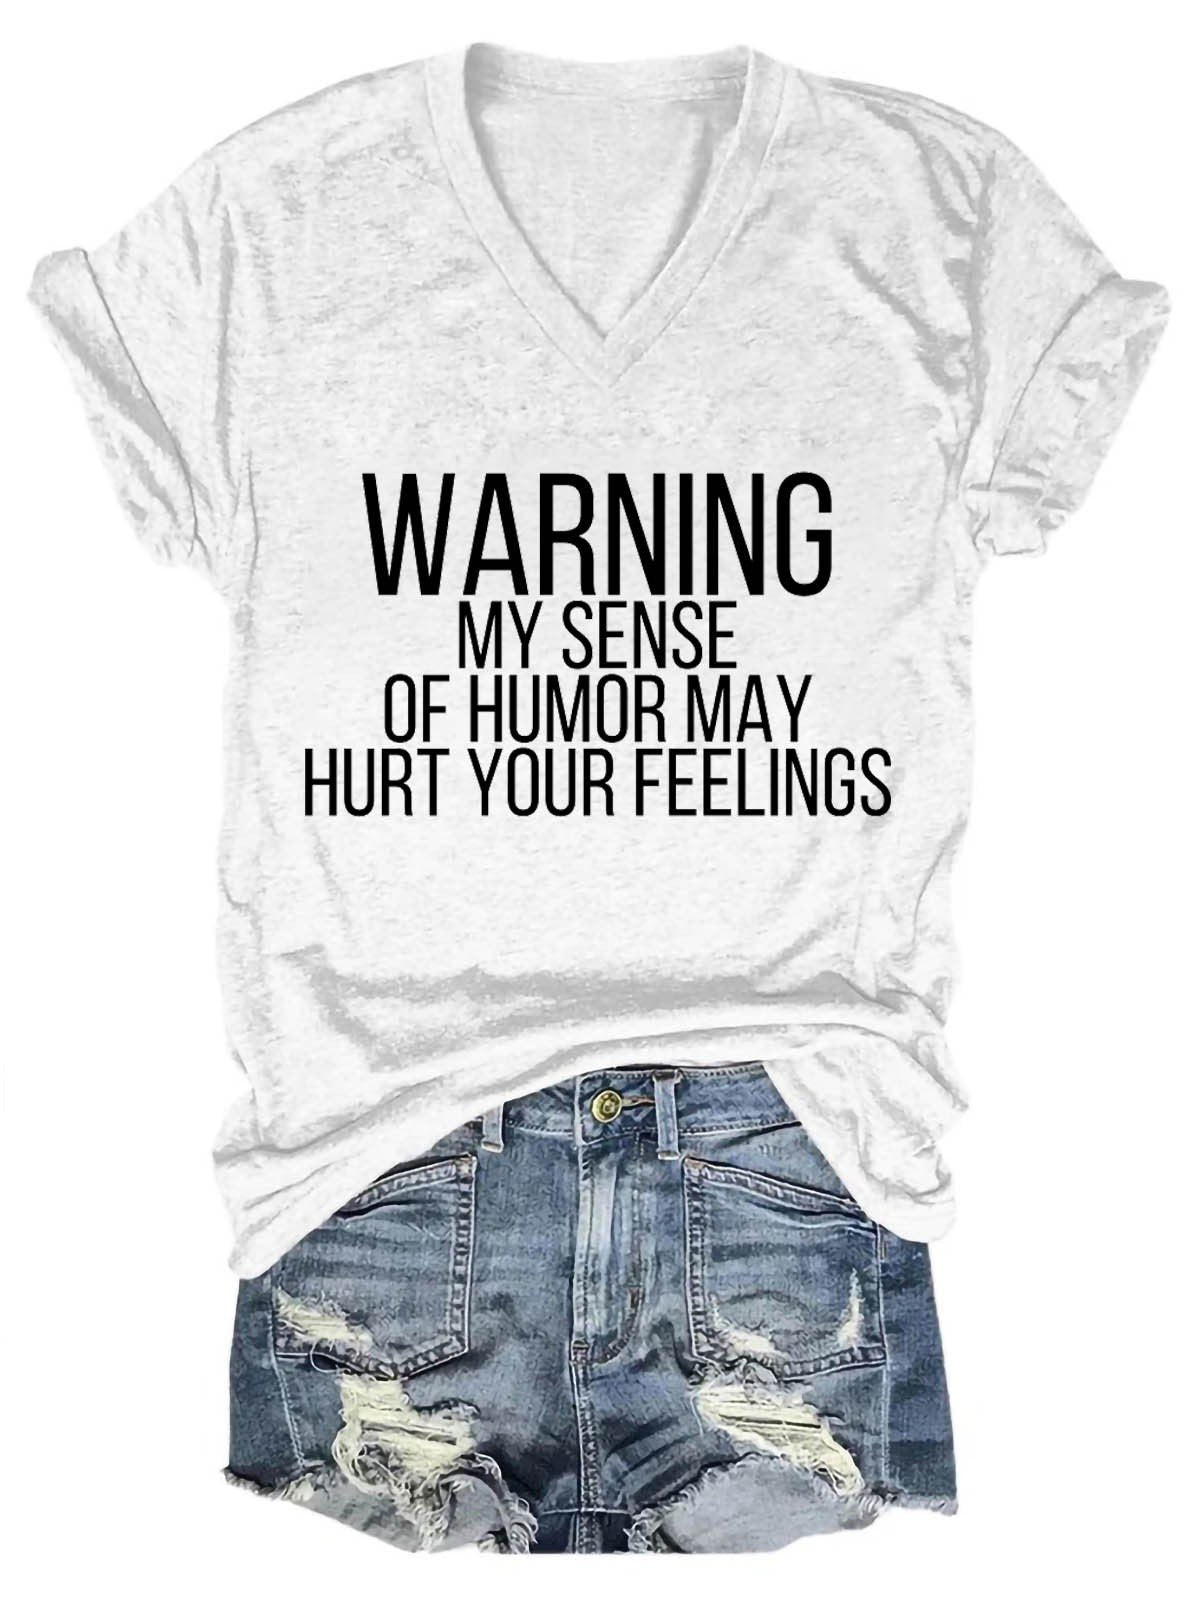 Women's Warning My Sens Of Humor May Hurt Your Feelings V-Neck T-Shirt - Outlets Forever